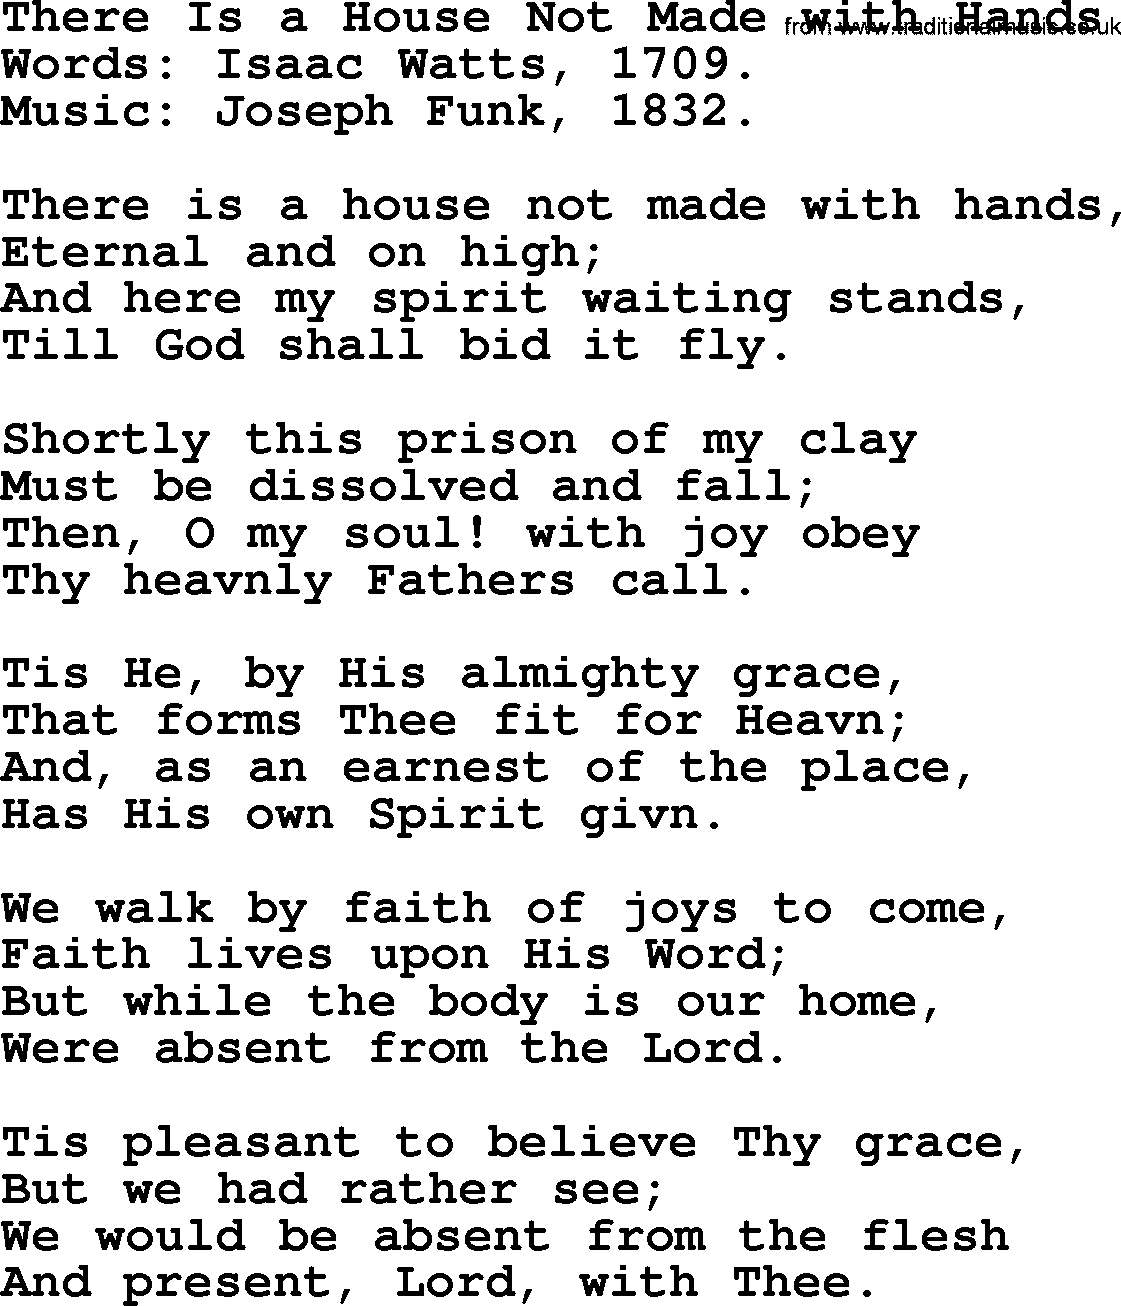 Isaac Watts Christian hymn: There Is a House Not Made with Hands- lyricss